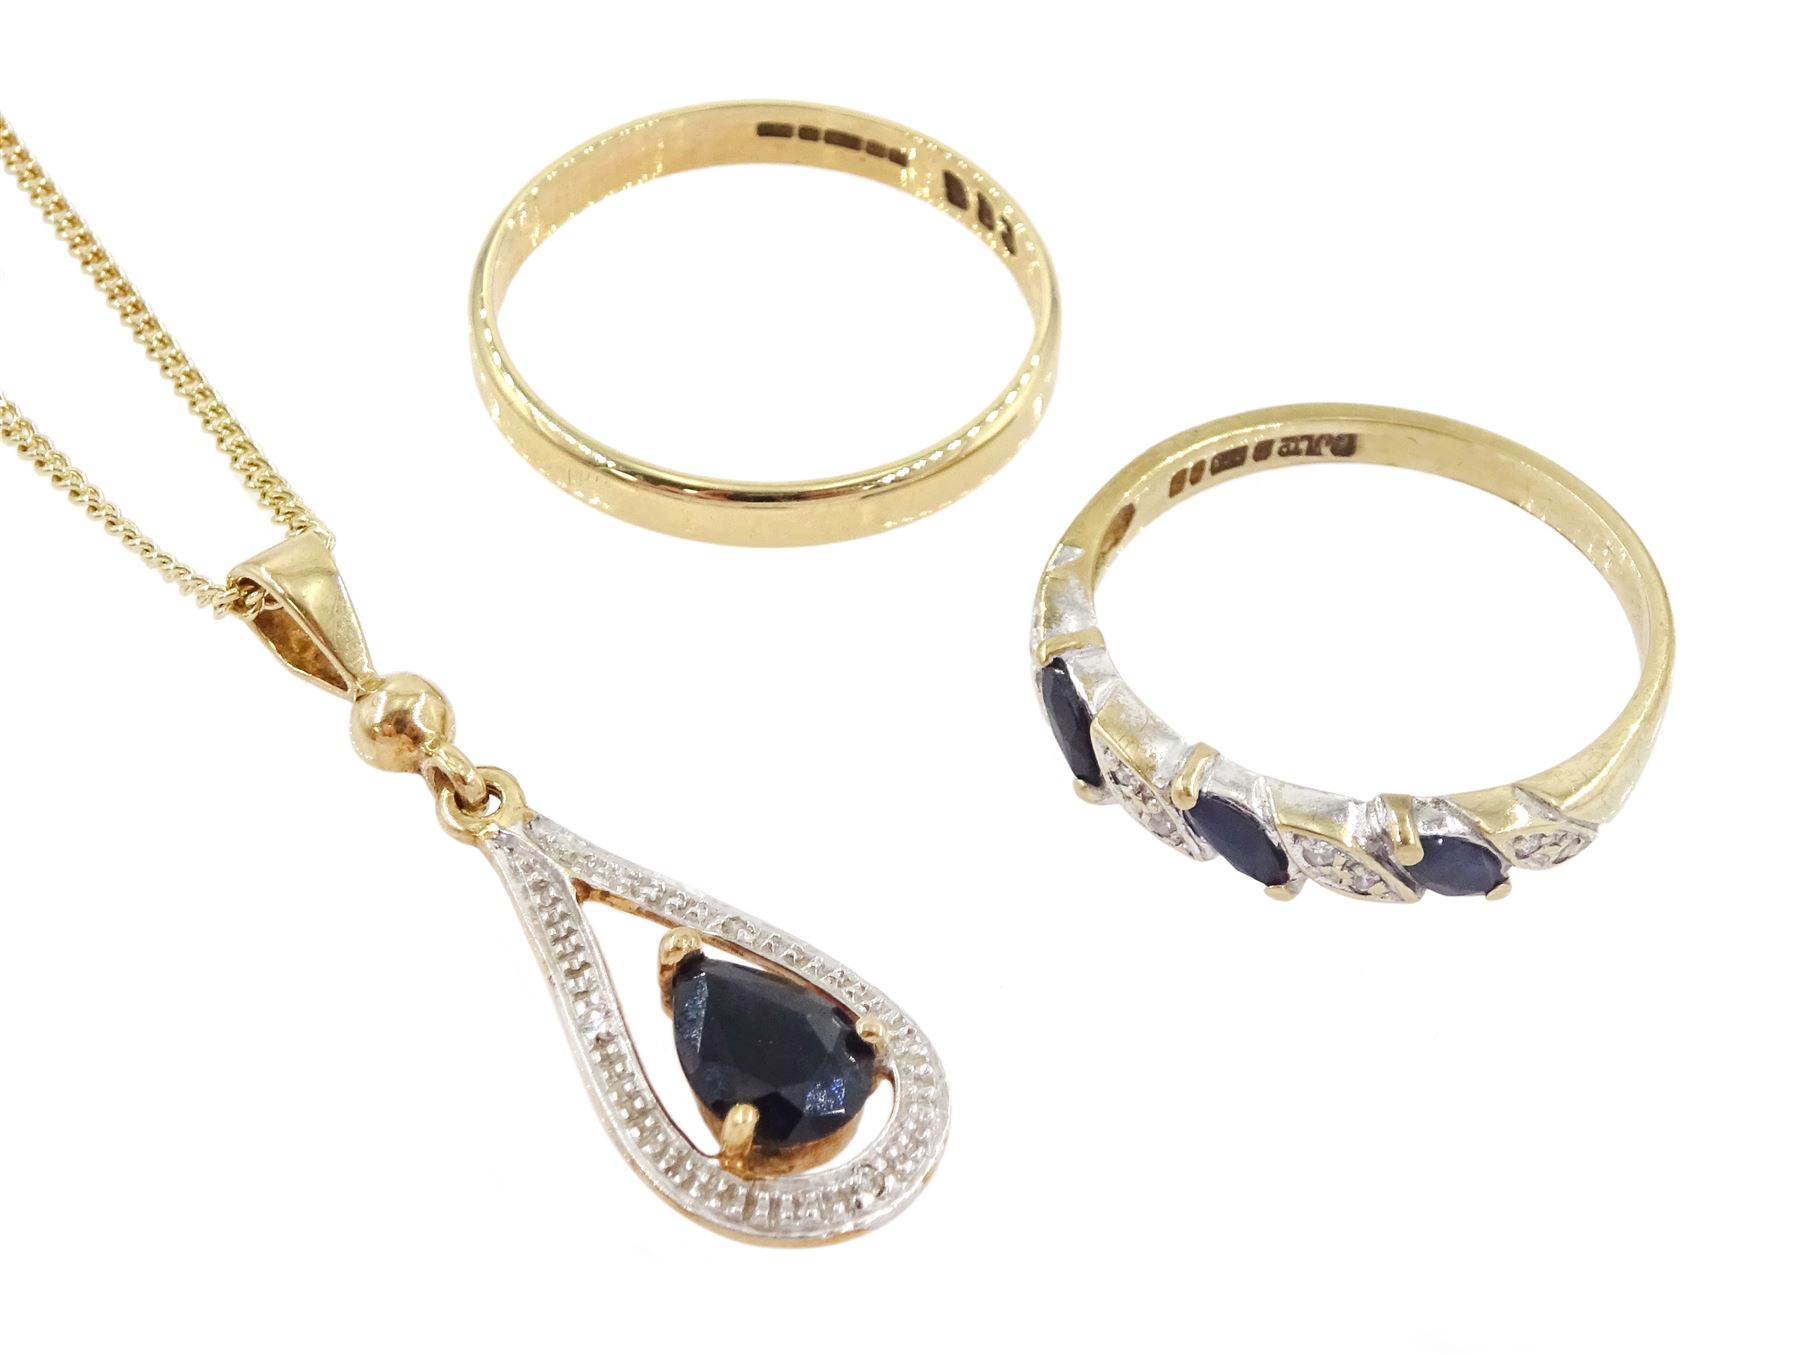 9ct gold jewellery including sapphire and diamond chip pendant necklace